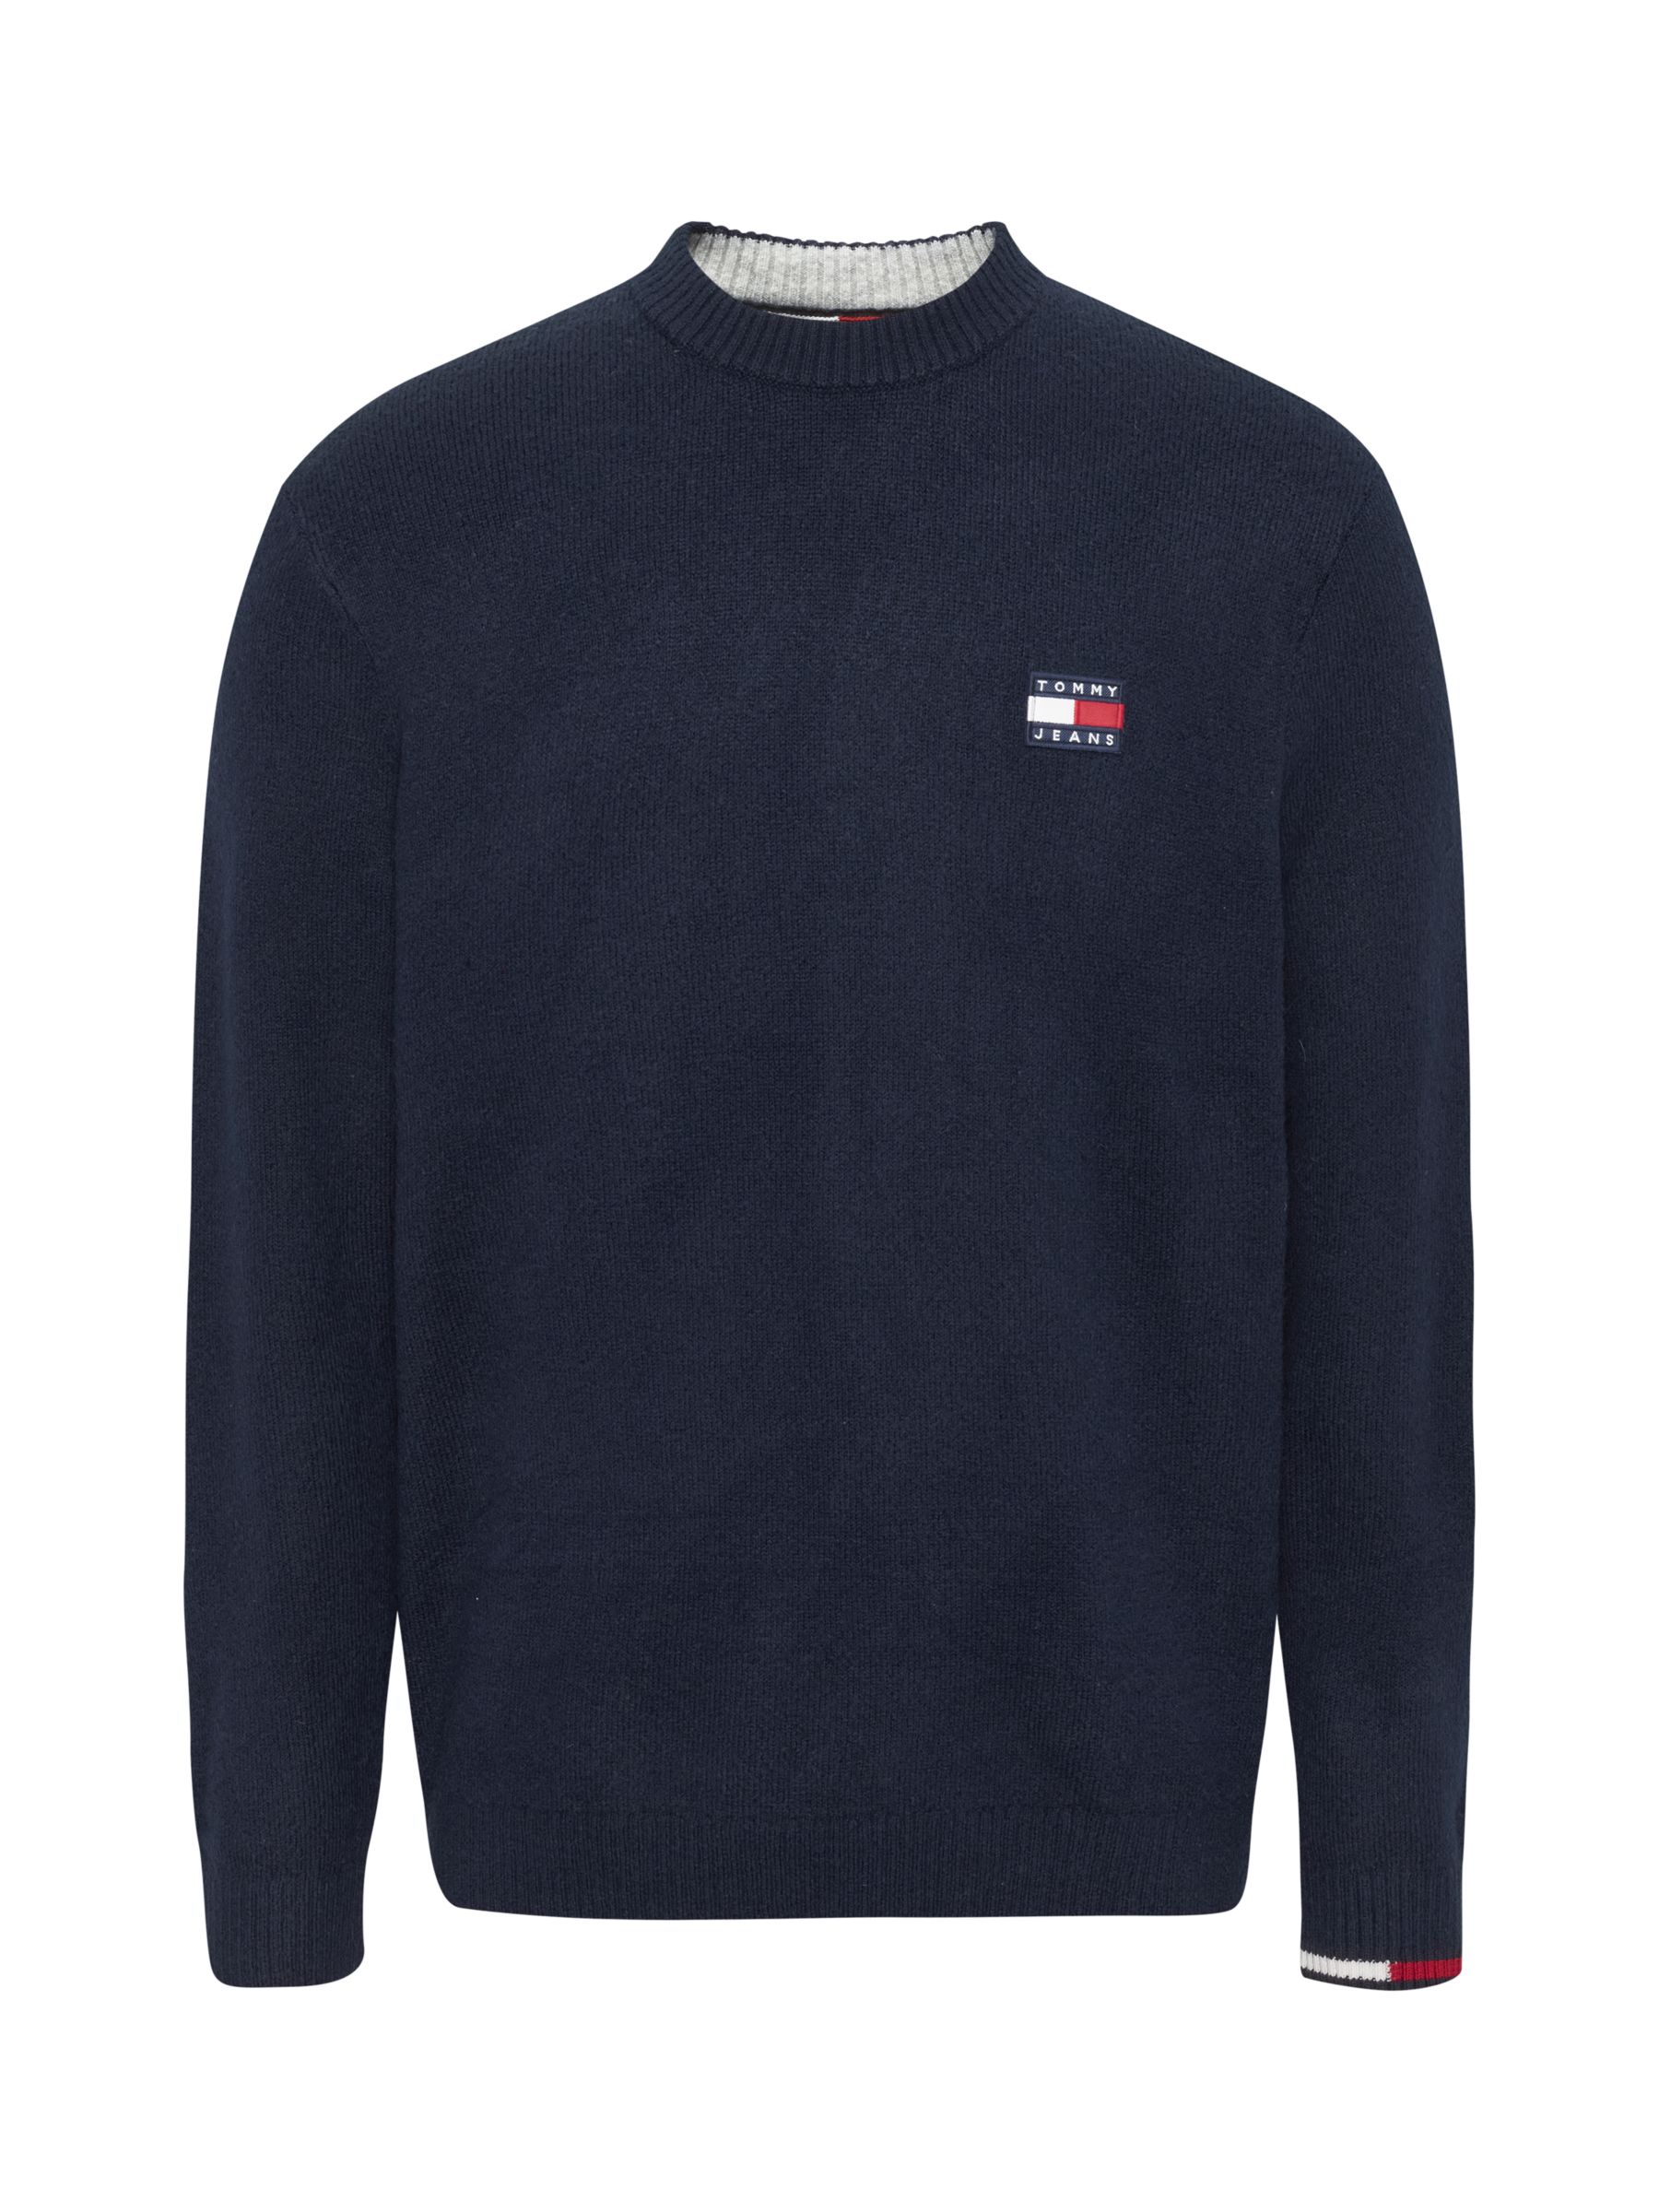 Tommy Jeans Relaxed Badge Jumper, Twilight Navy at John Lewis & Partners